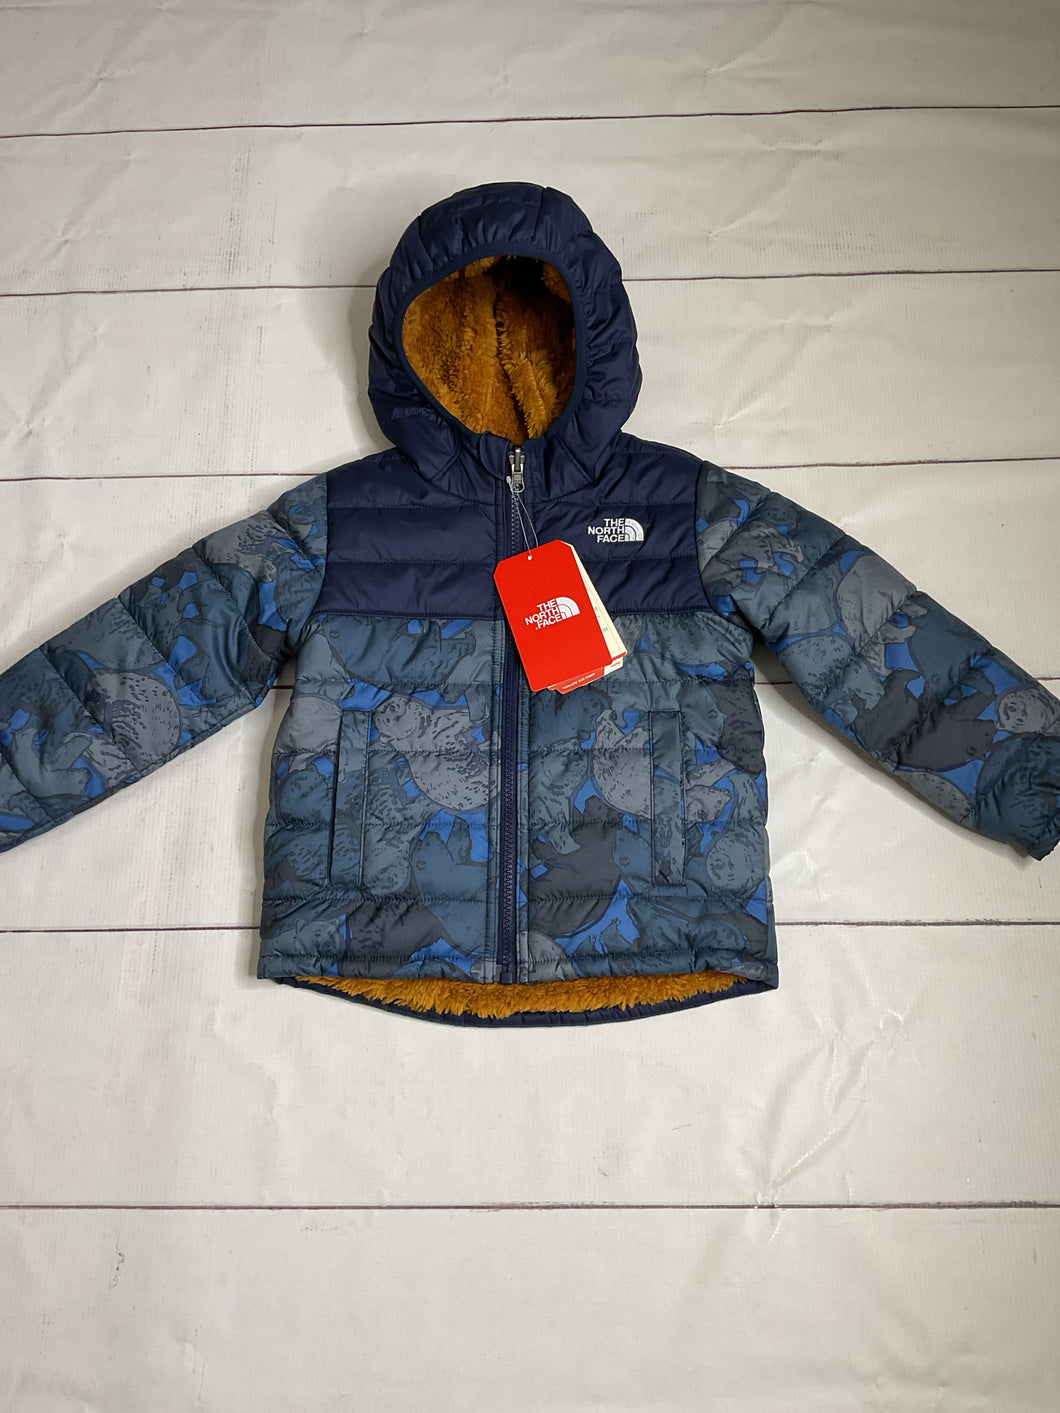 North Face Size 4 Coat